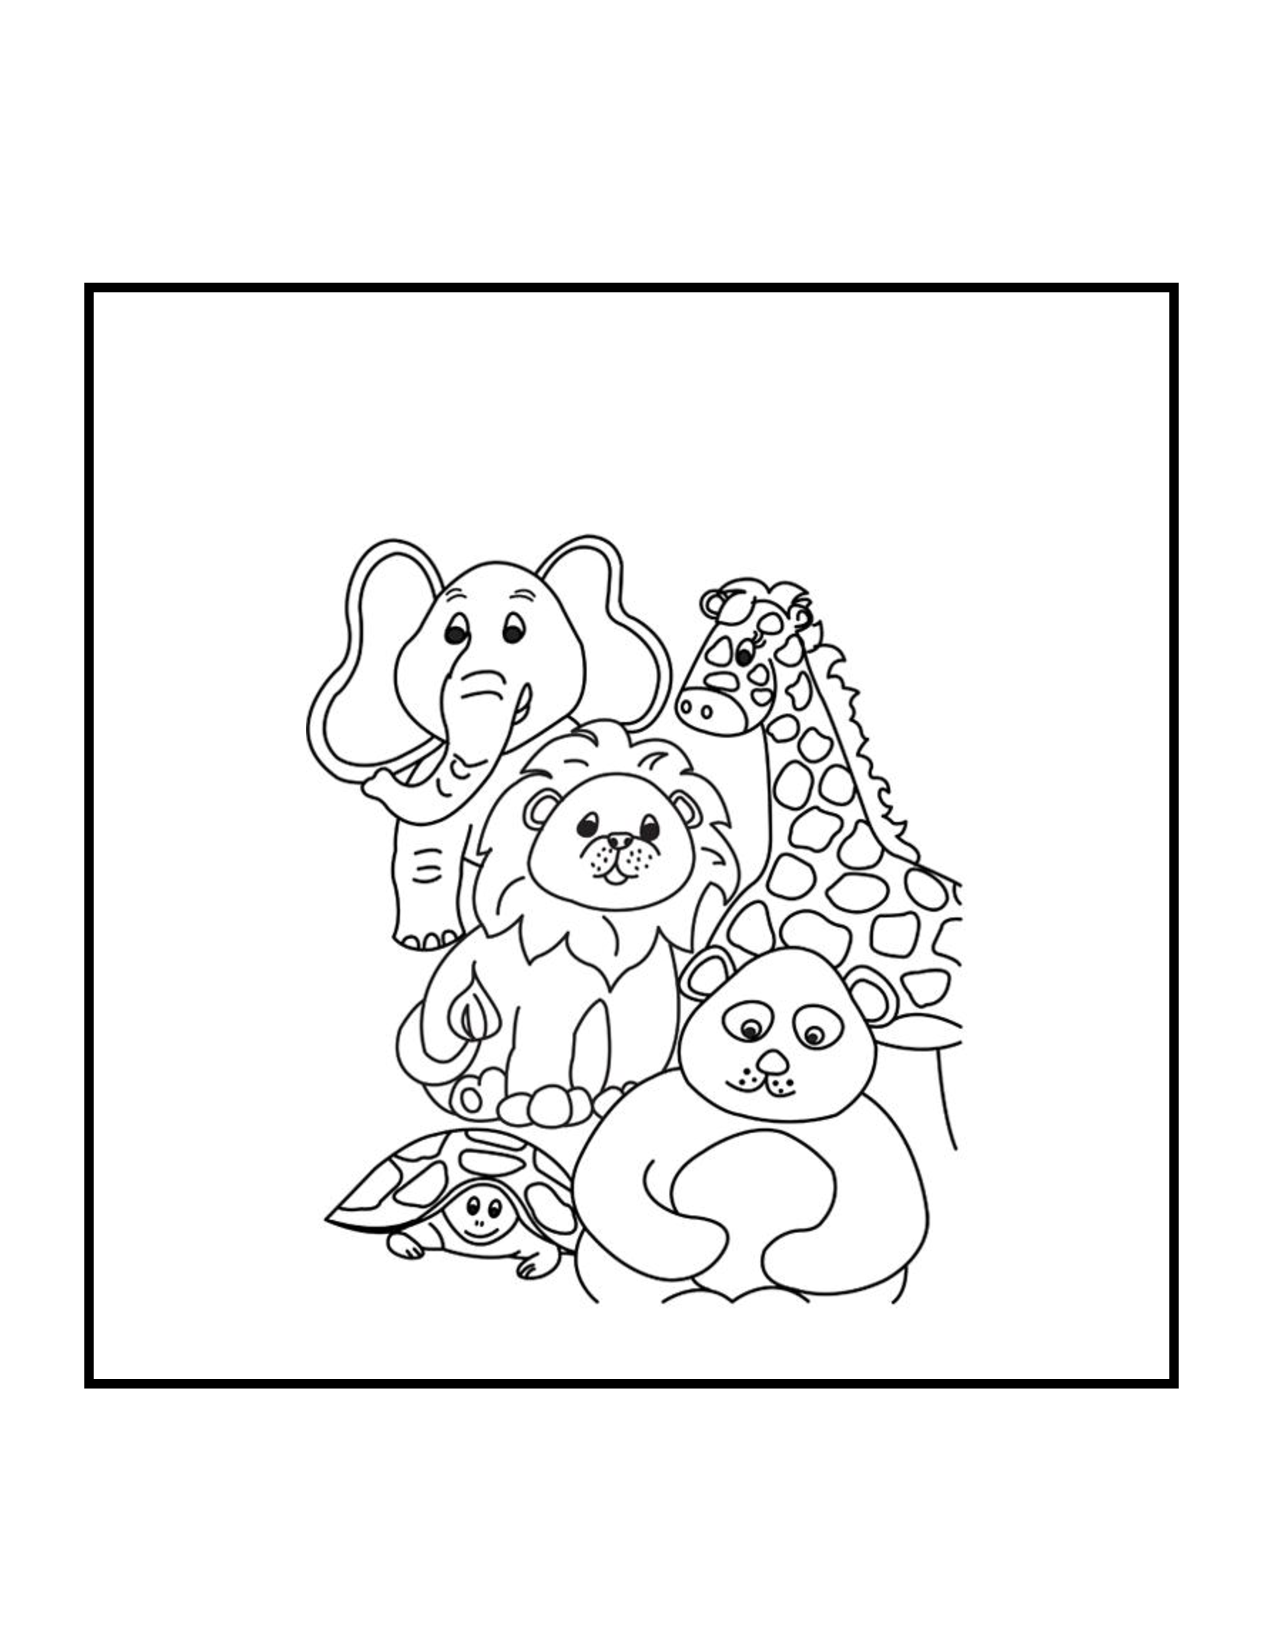 drawing zoo 12896 animals printable coloring pages